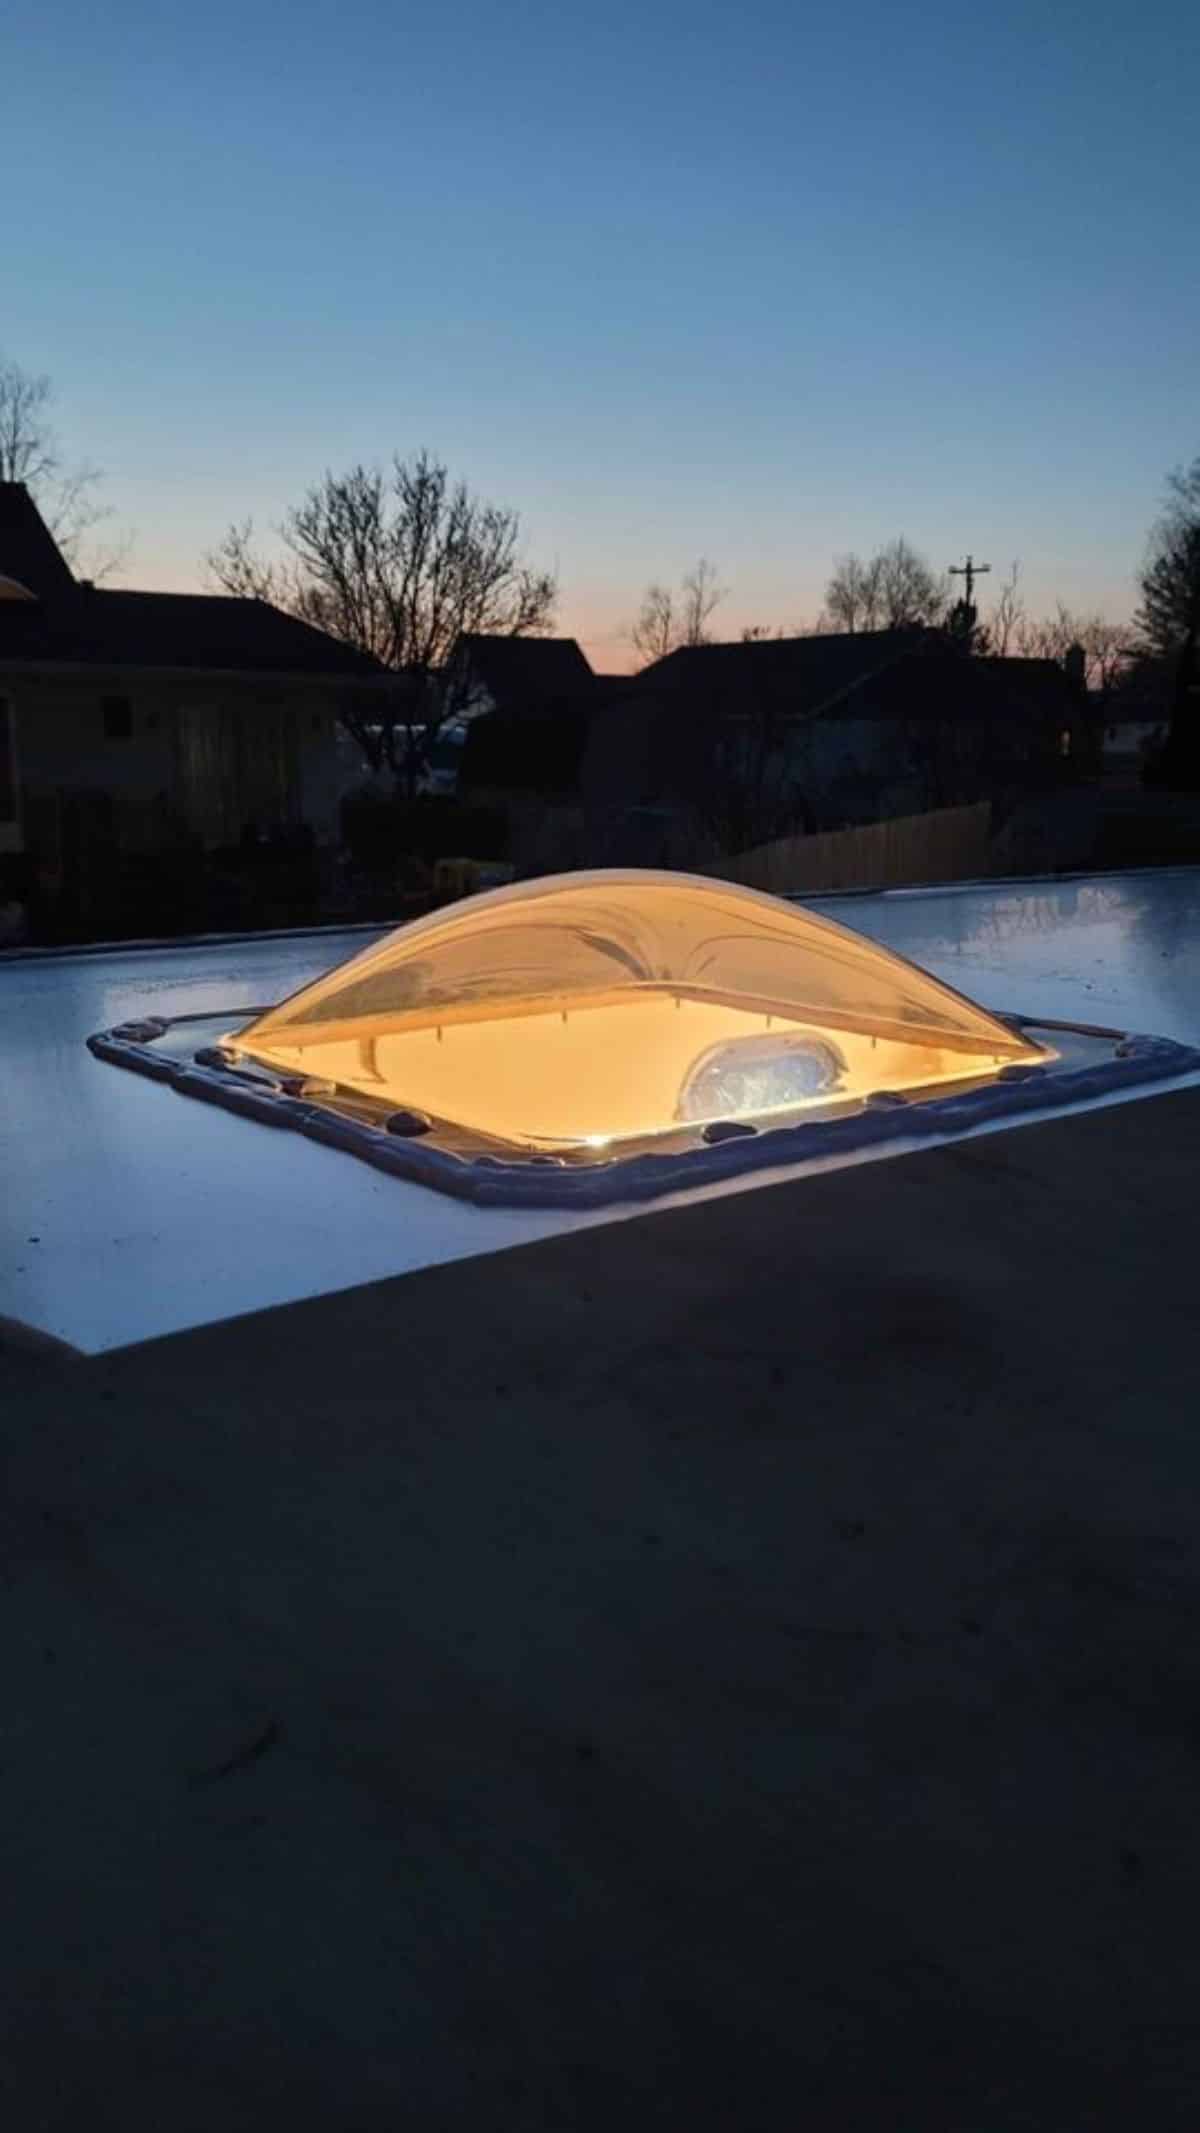 Skylight window makes it more brighter and stunning